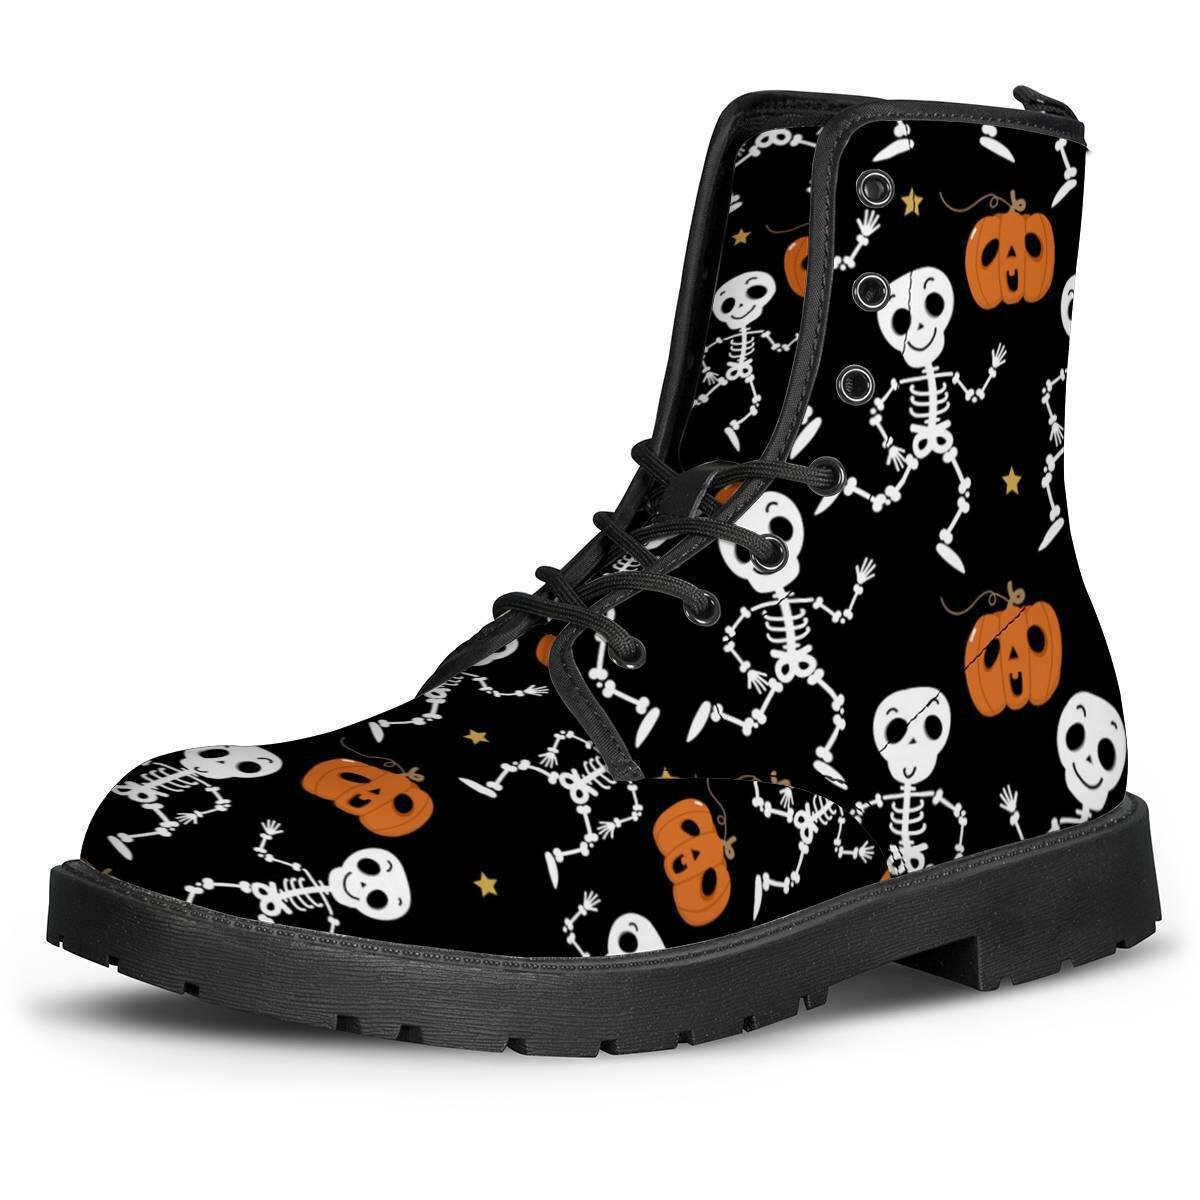 Men Leather Soft Sole Halloween Wacky Printing Non Slip Round Toe Casual Martin Boots